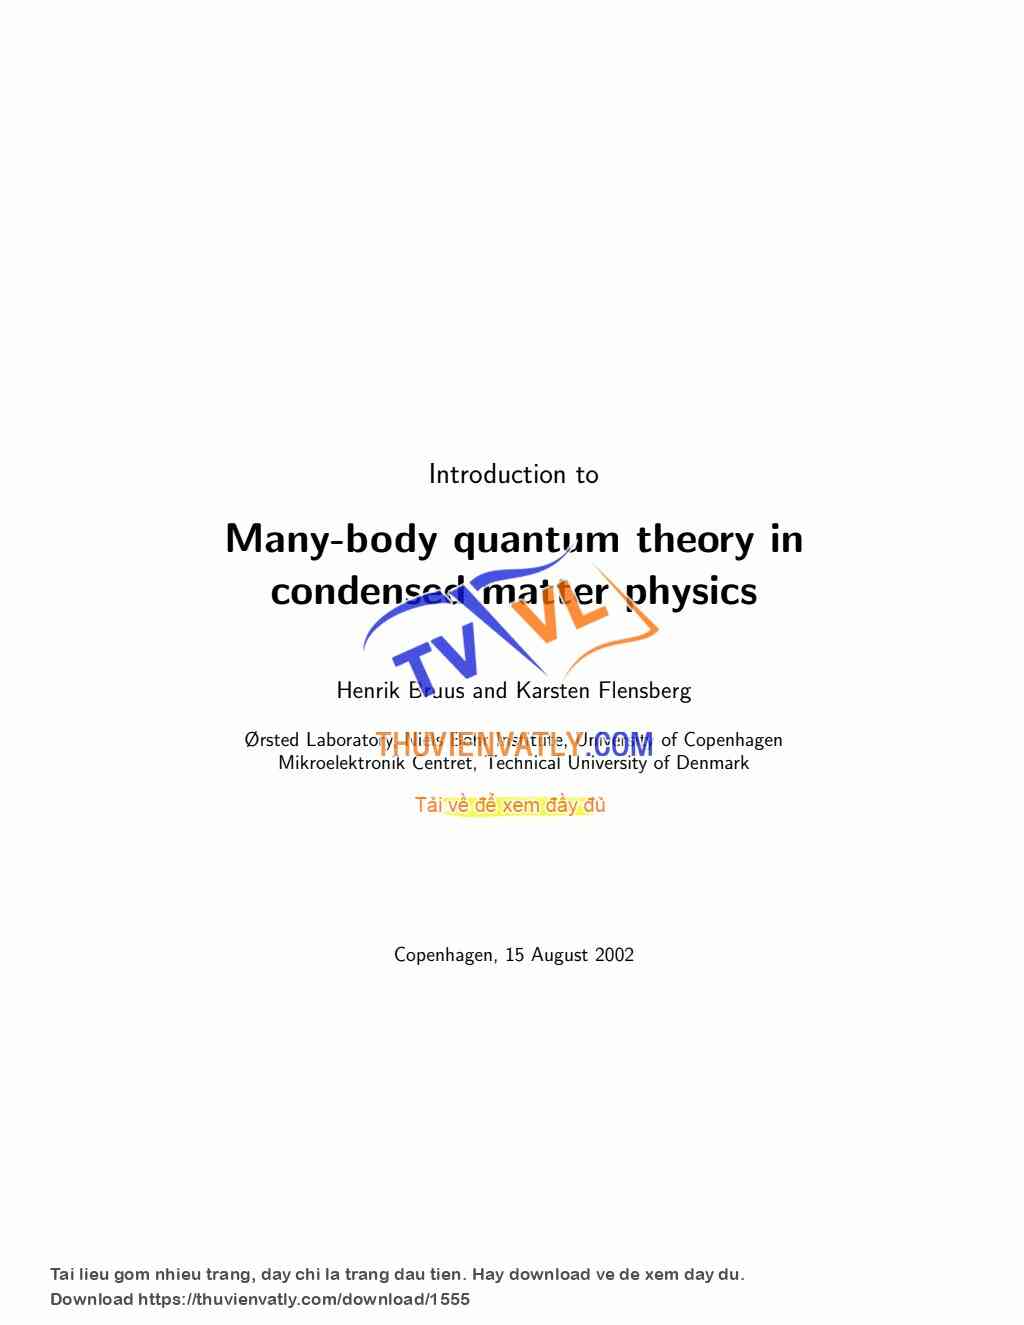 Many-body Quantum Theory In Condensed Matter Physics